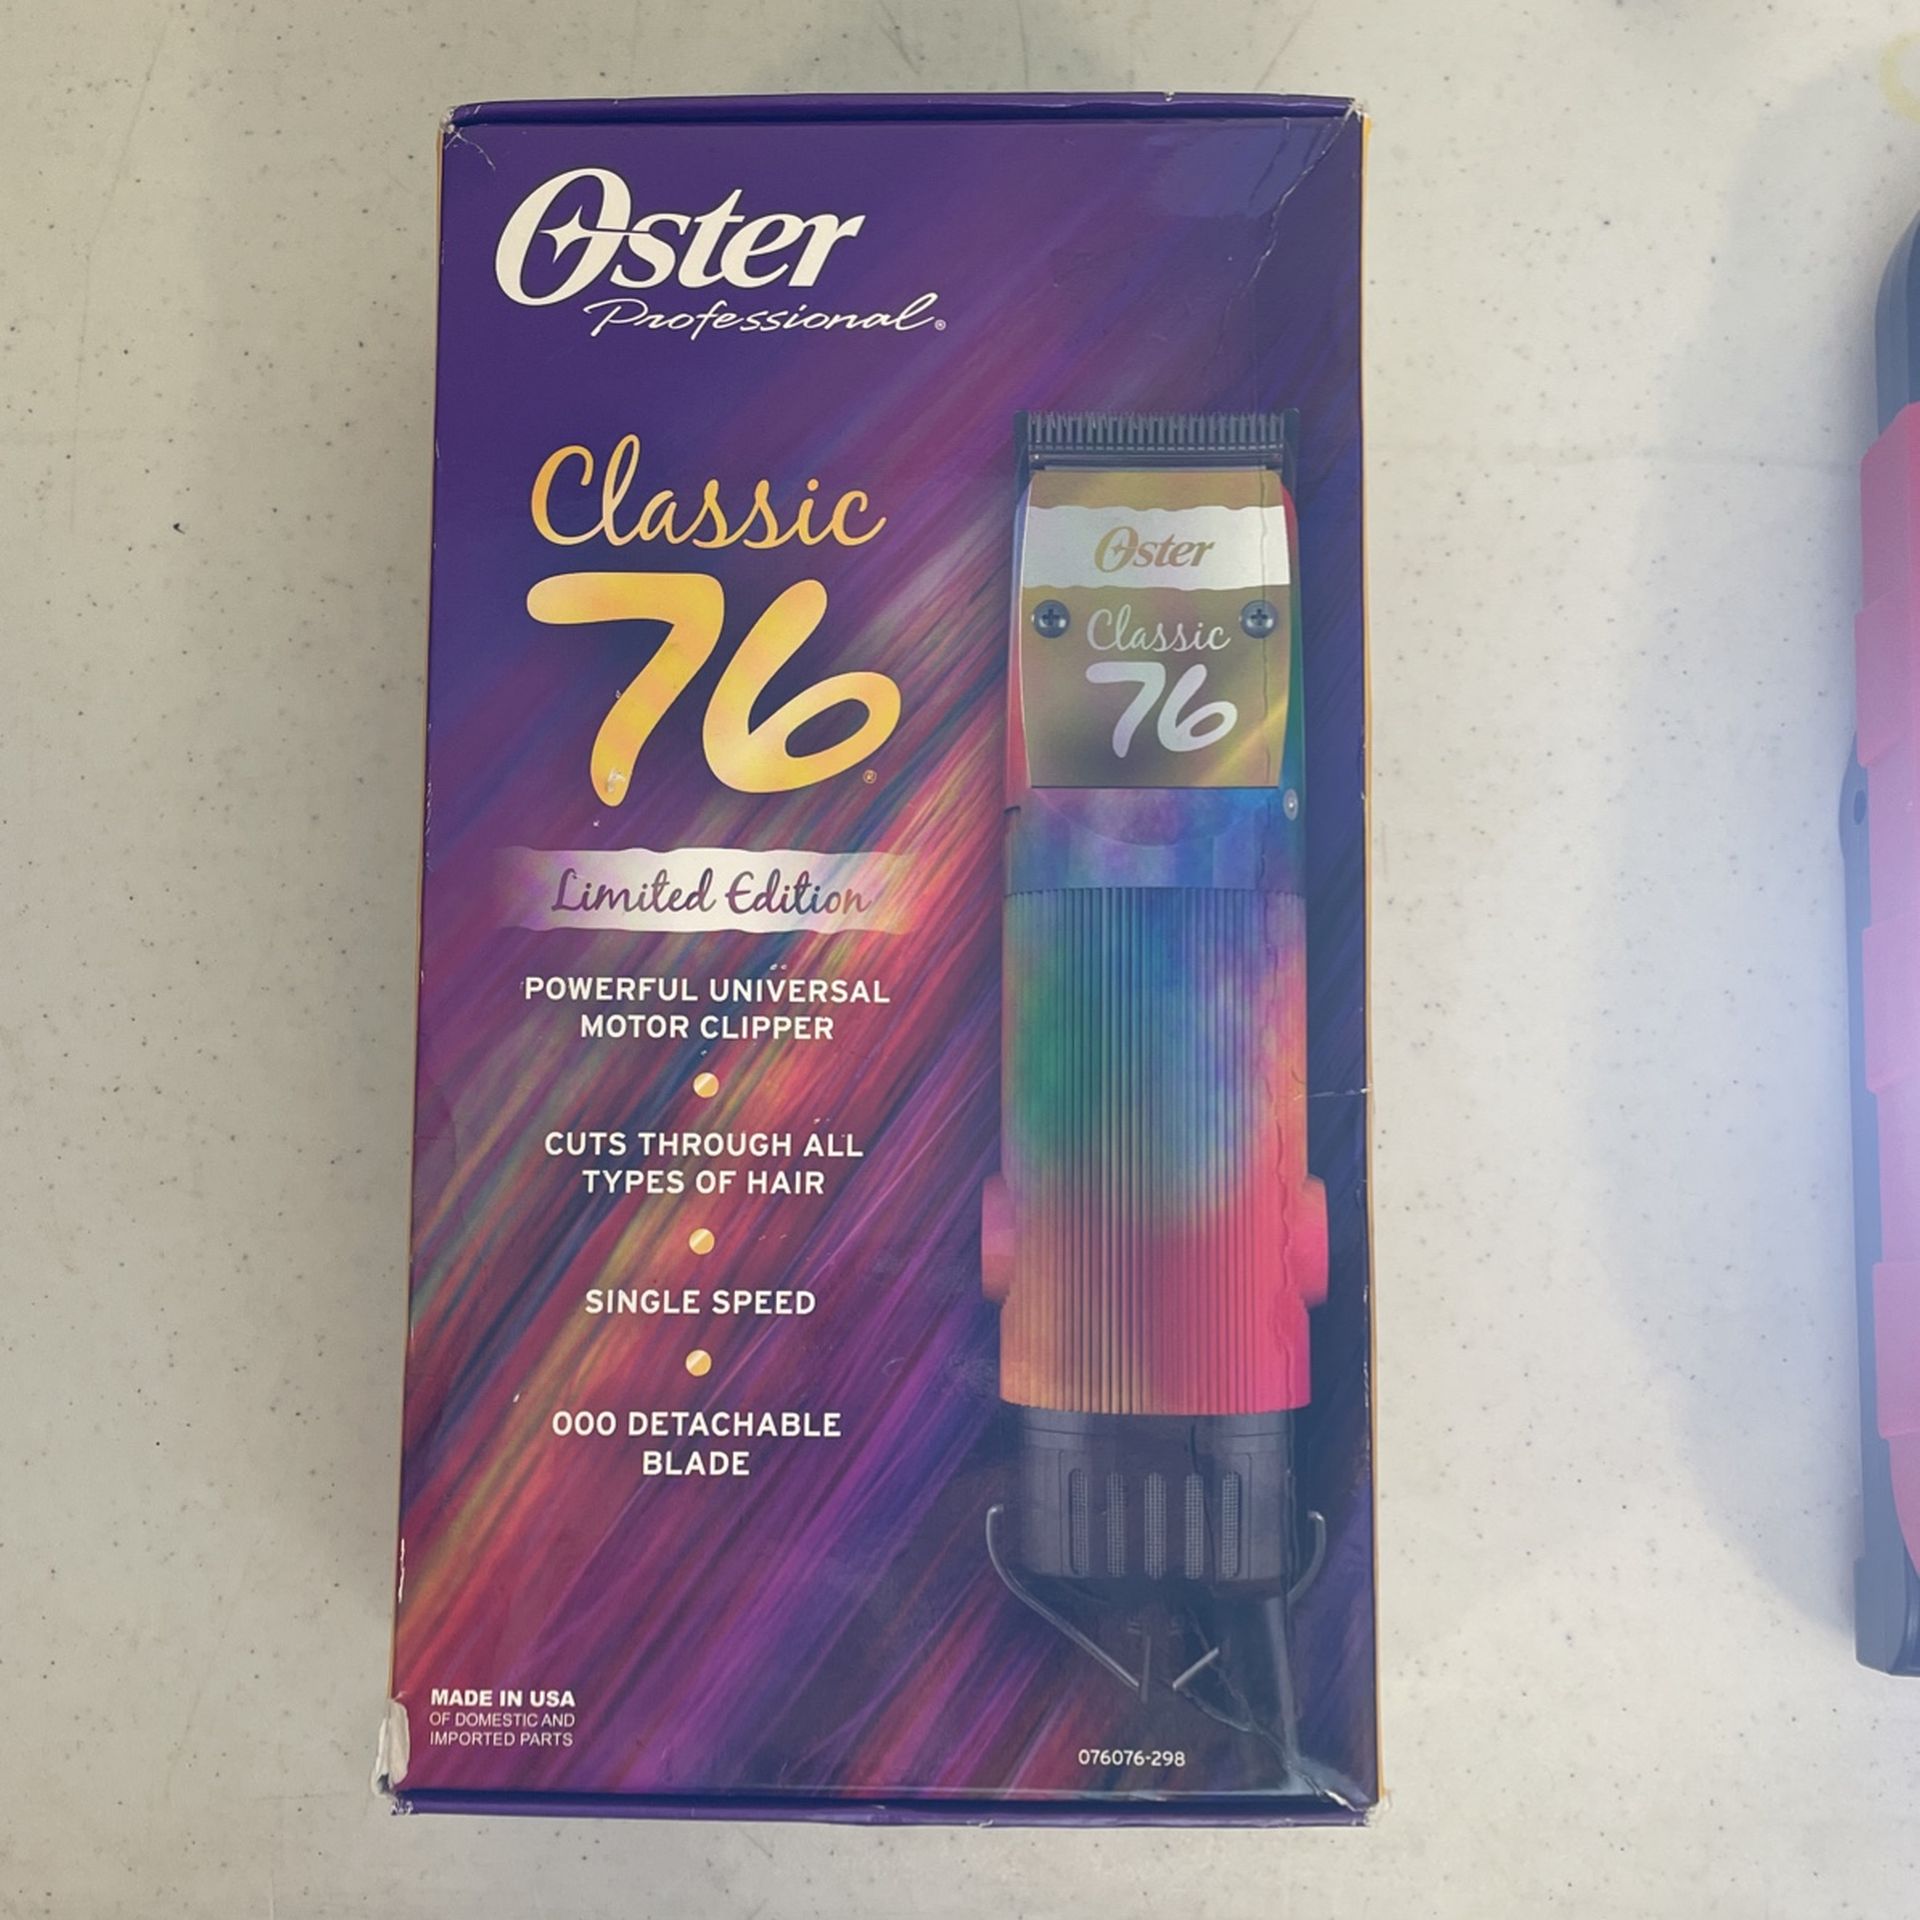 Oster Professional Classic 76 Limited Edition Hair Clippers 